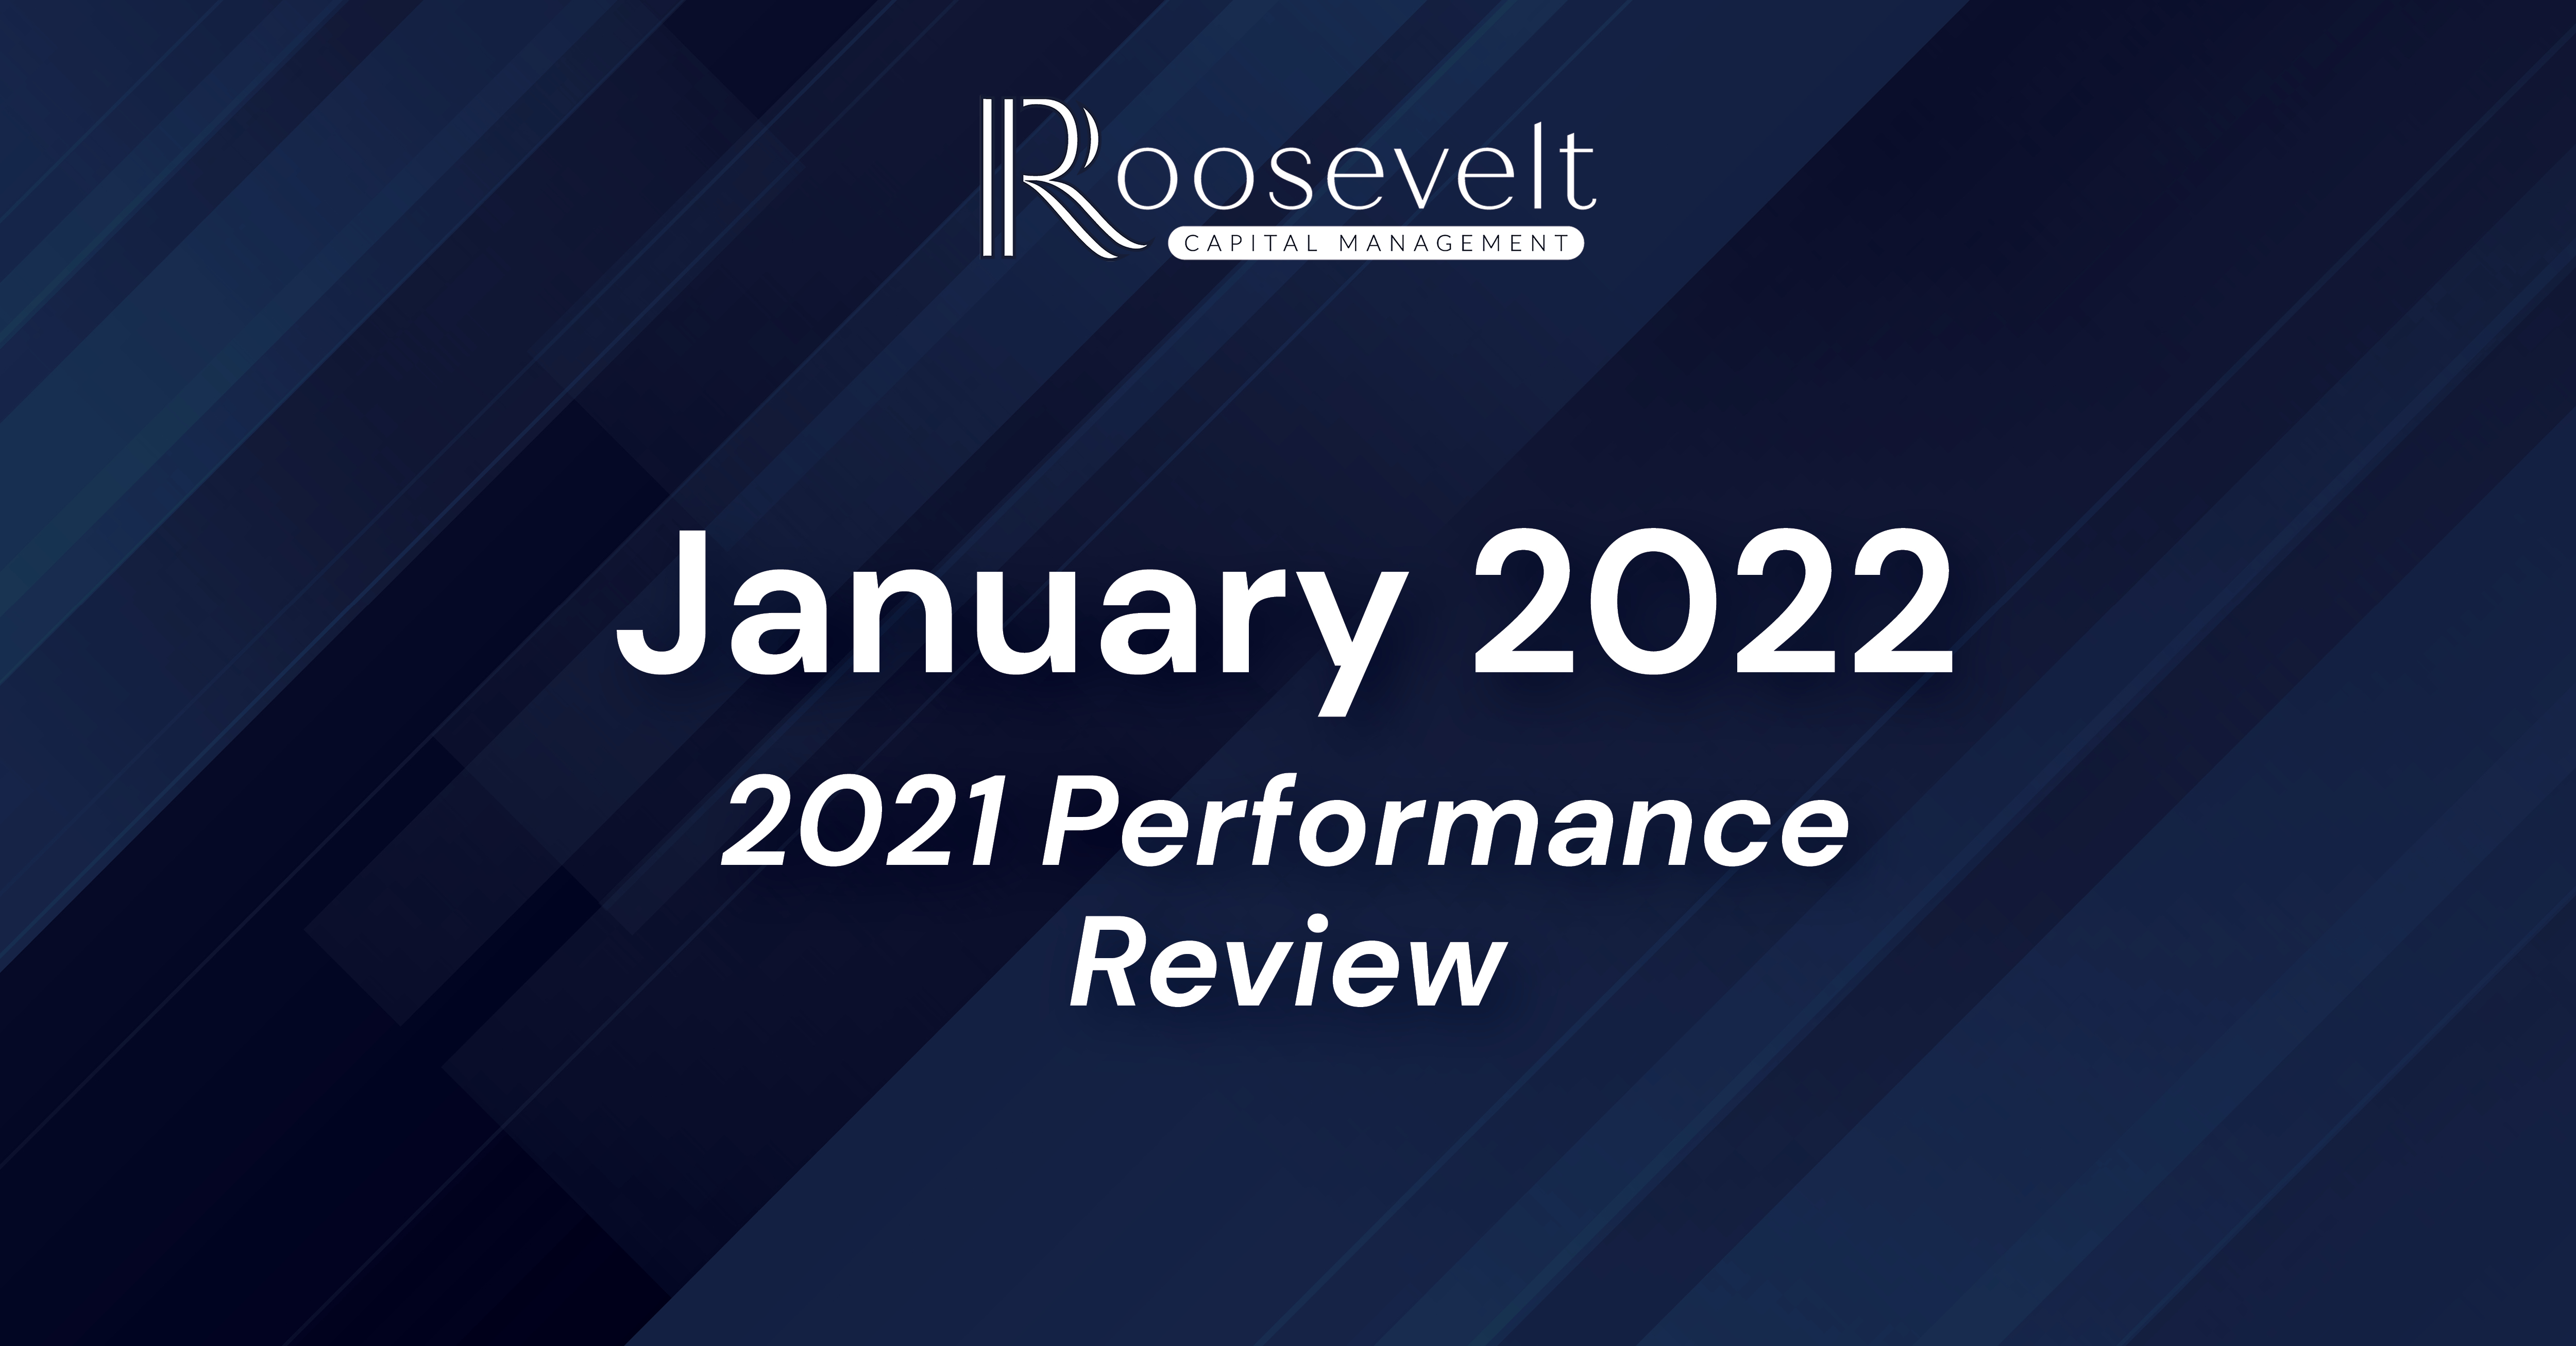 January 2022 - 2021 Performance Review